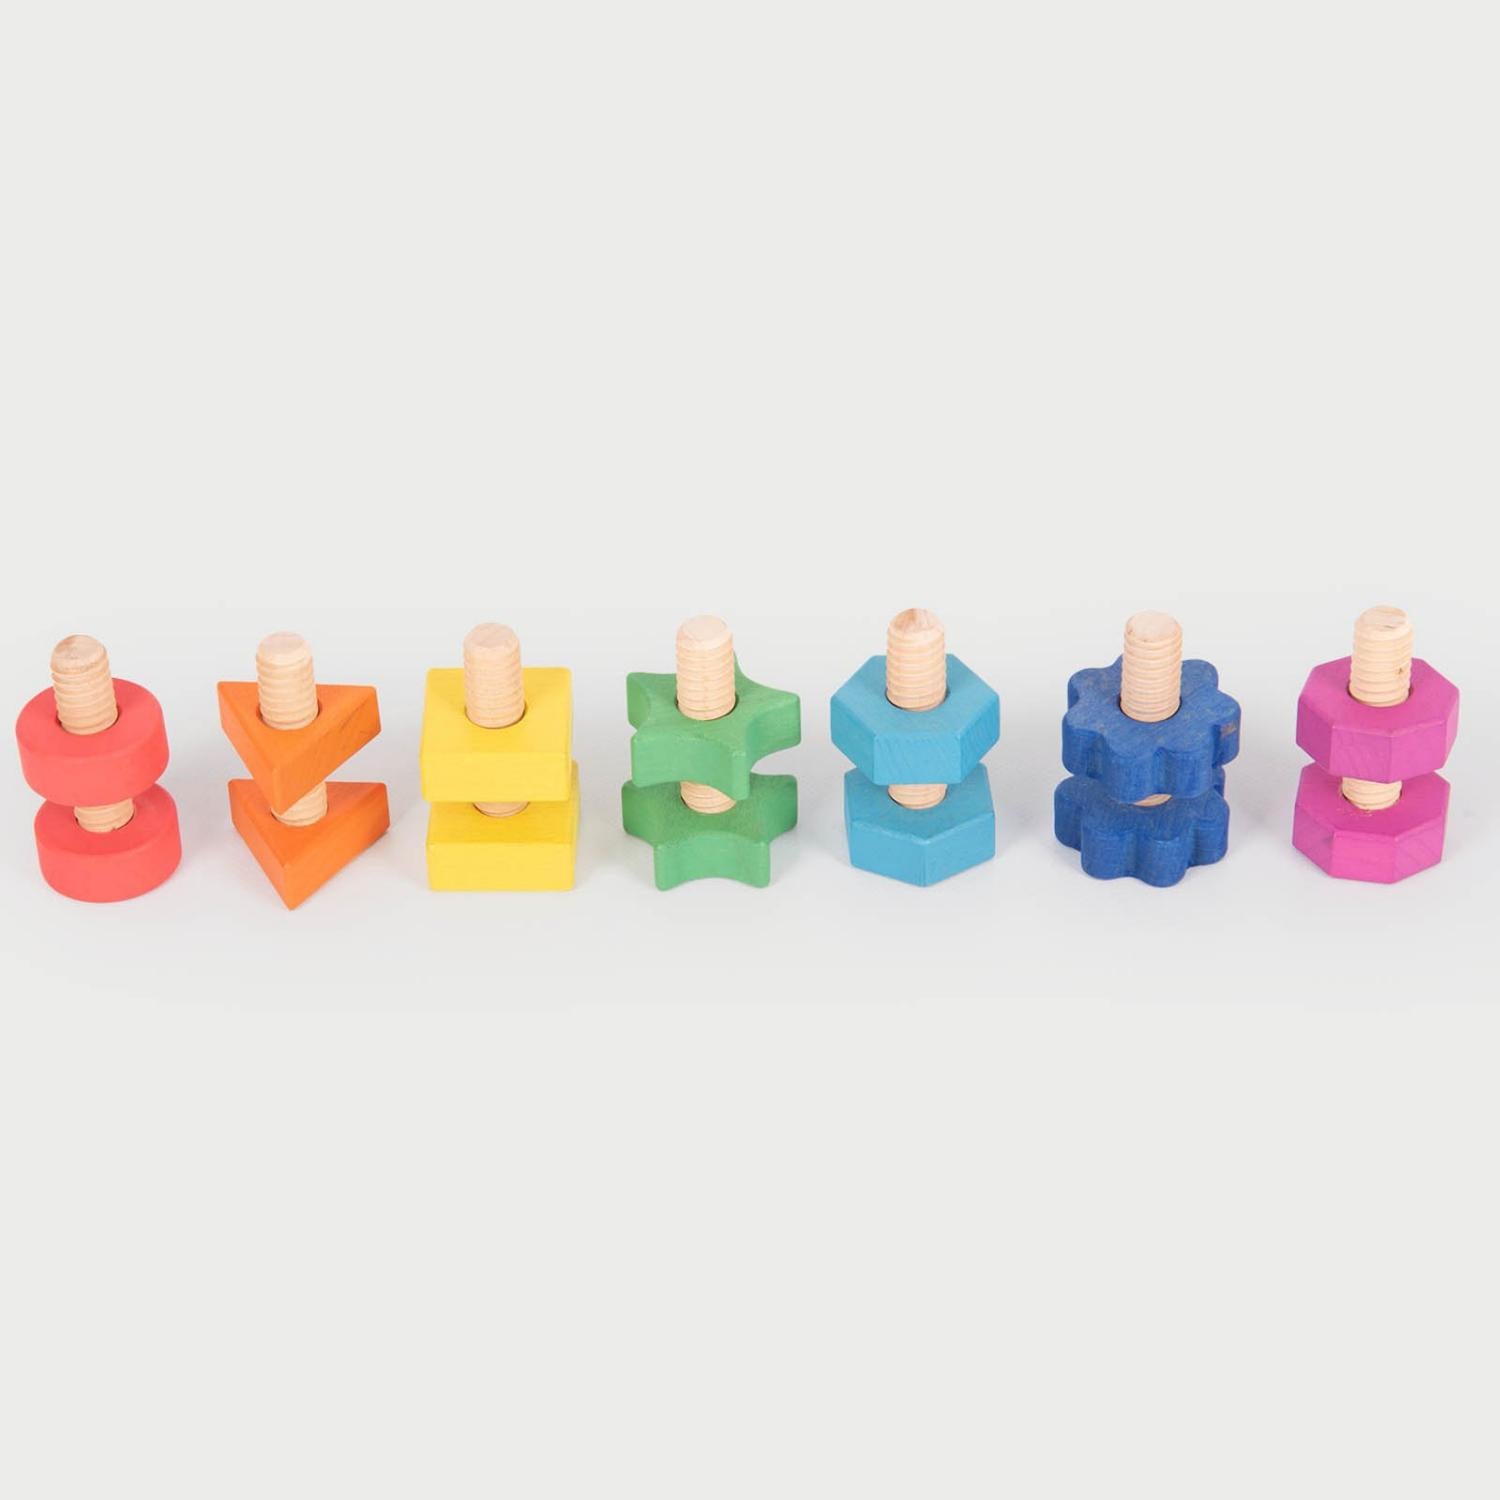 TickiT Rainbow Wooden Nuts & Bolts| Set of 7 Pieces | Wooden Loose Parts | Open-Ended Toys | Front View – All Nuts & Bolts Assembled | BeoVERDE.ie